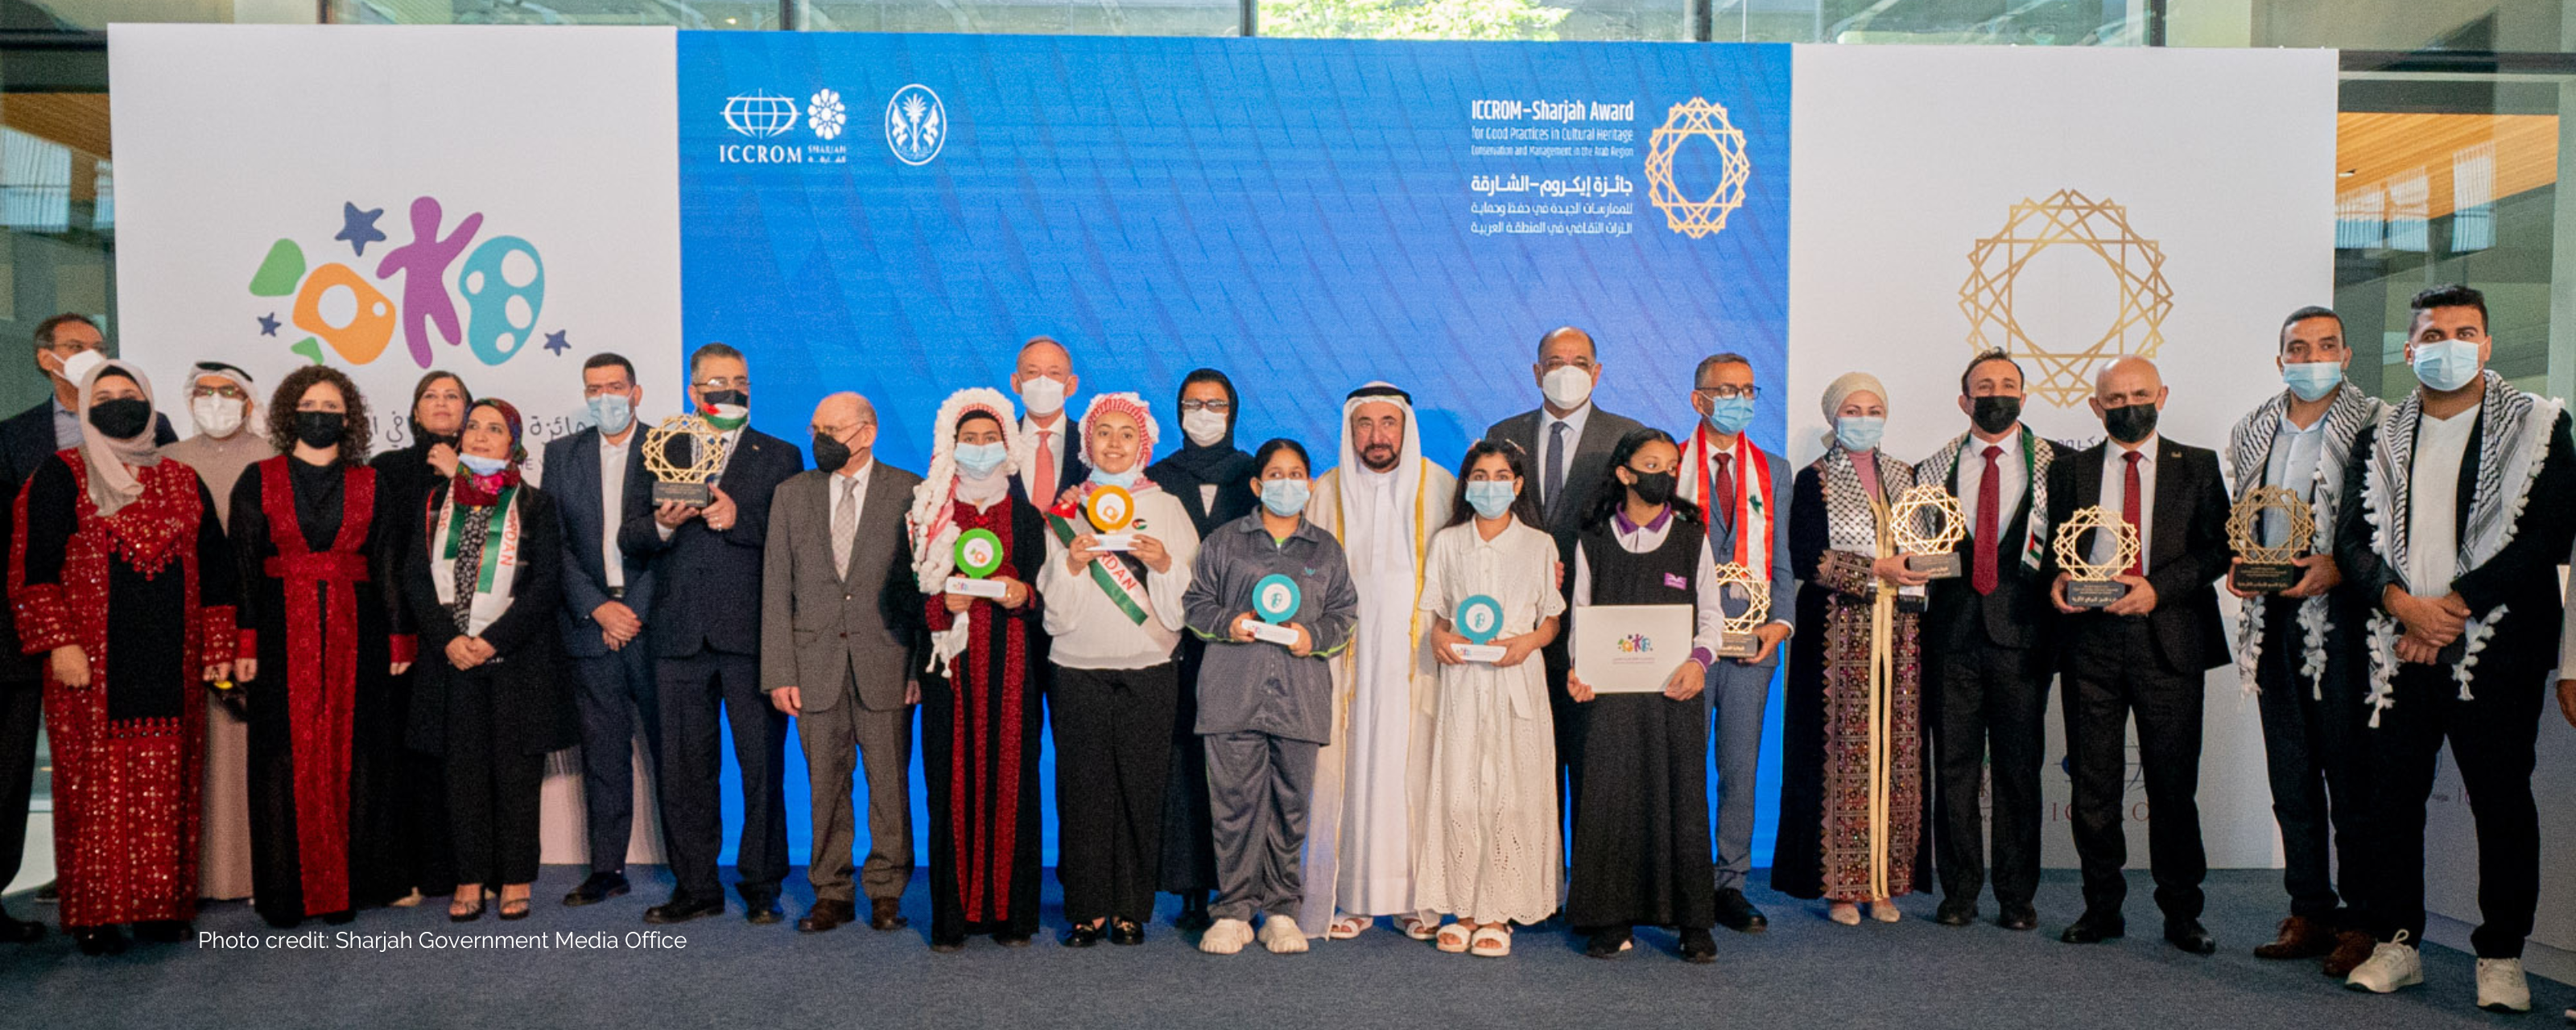 Pictured are the young winners of the Arab Cultural Heritage Award for the Young, which awarded first place in the categories of drawing, photography, folk dance and film. Photo credit: Sharjah Government Media Office